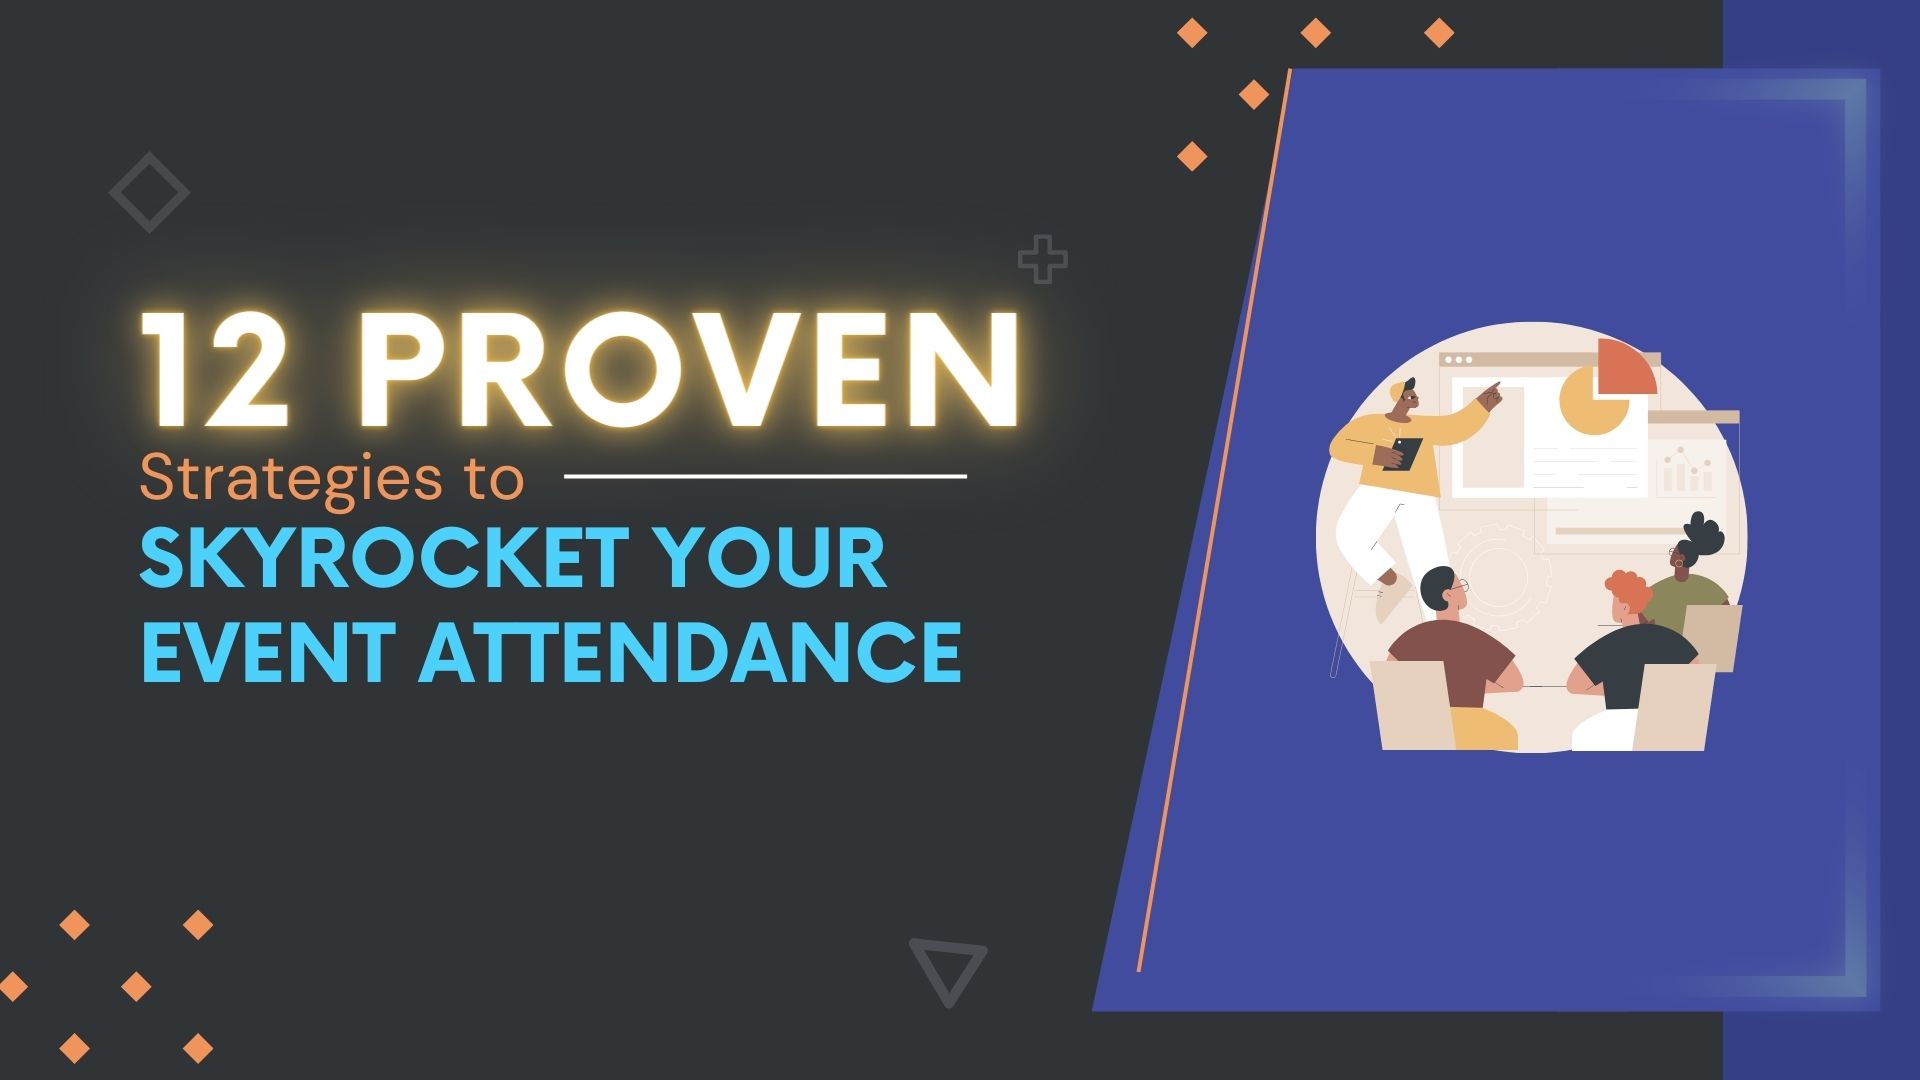 12 Proven Strategies to Skyrocket Your Event Attendance